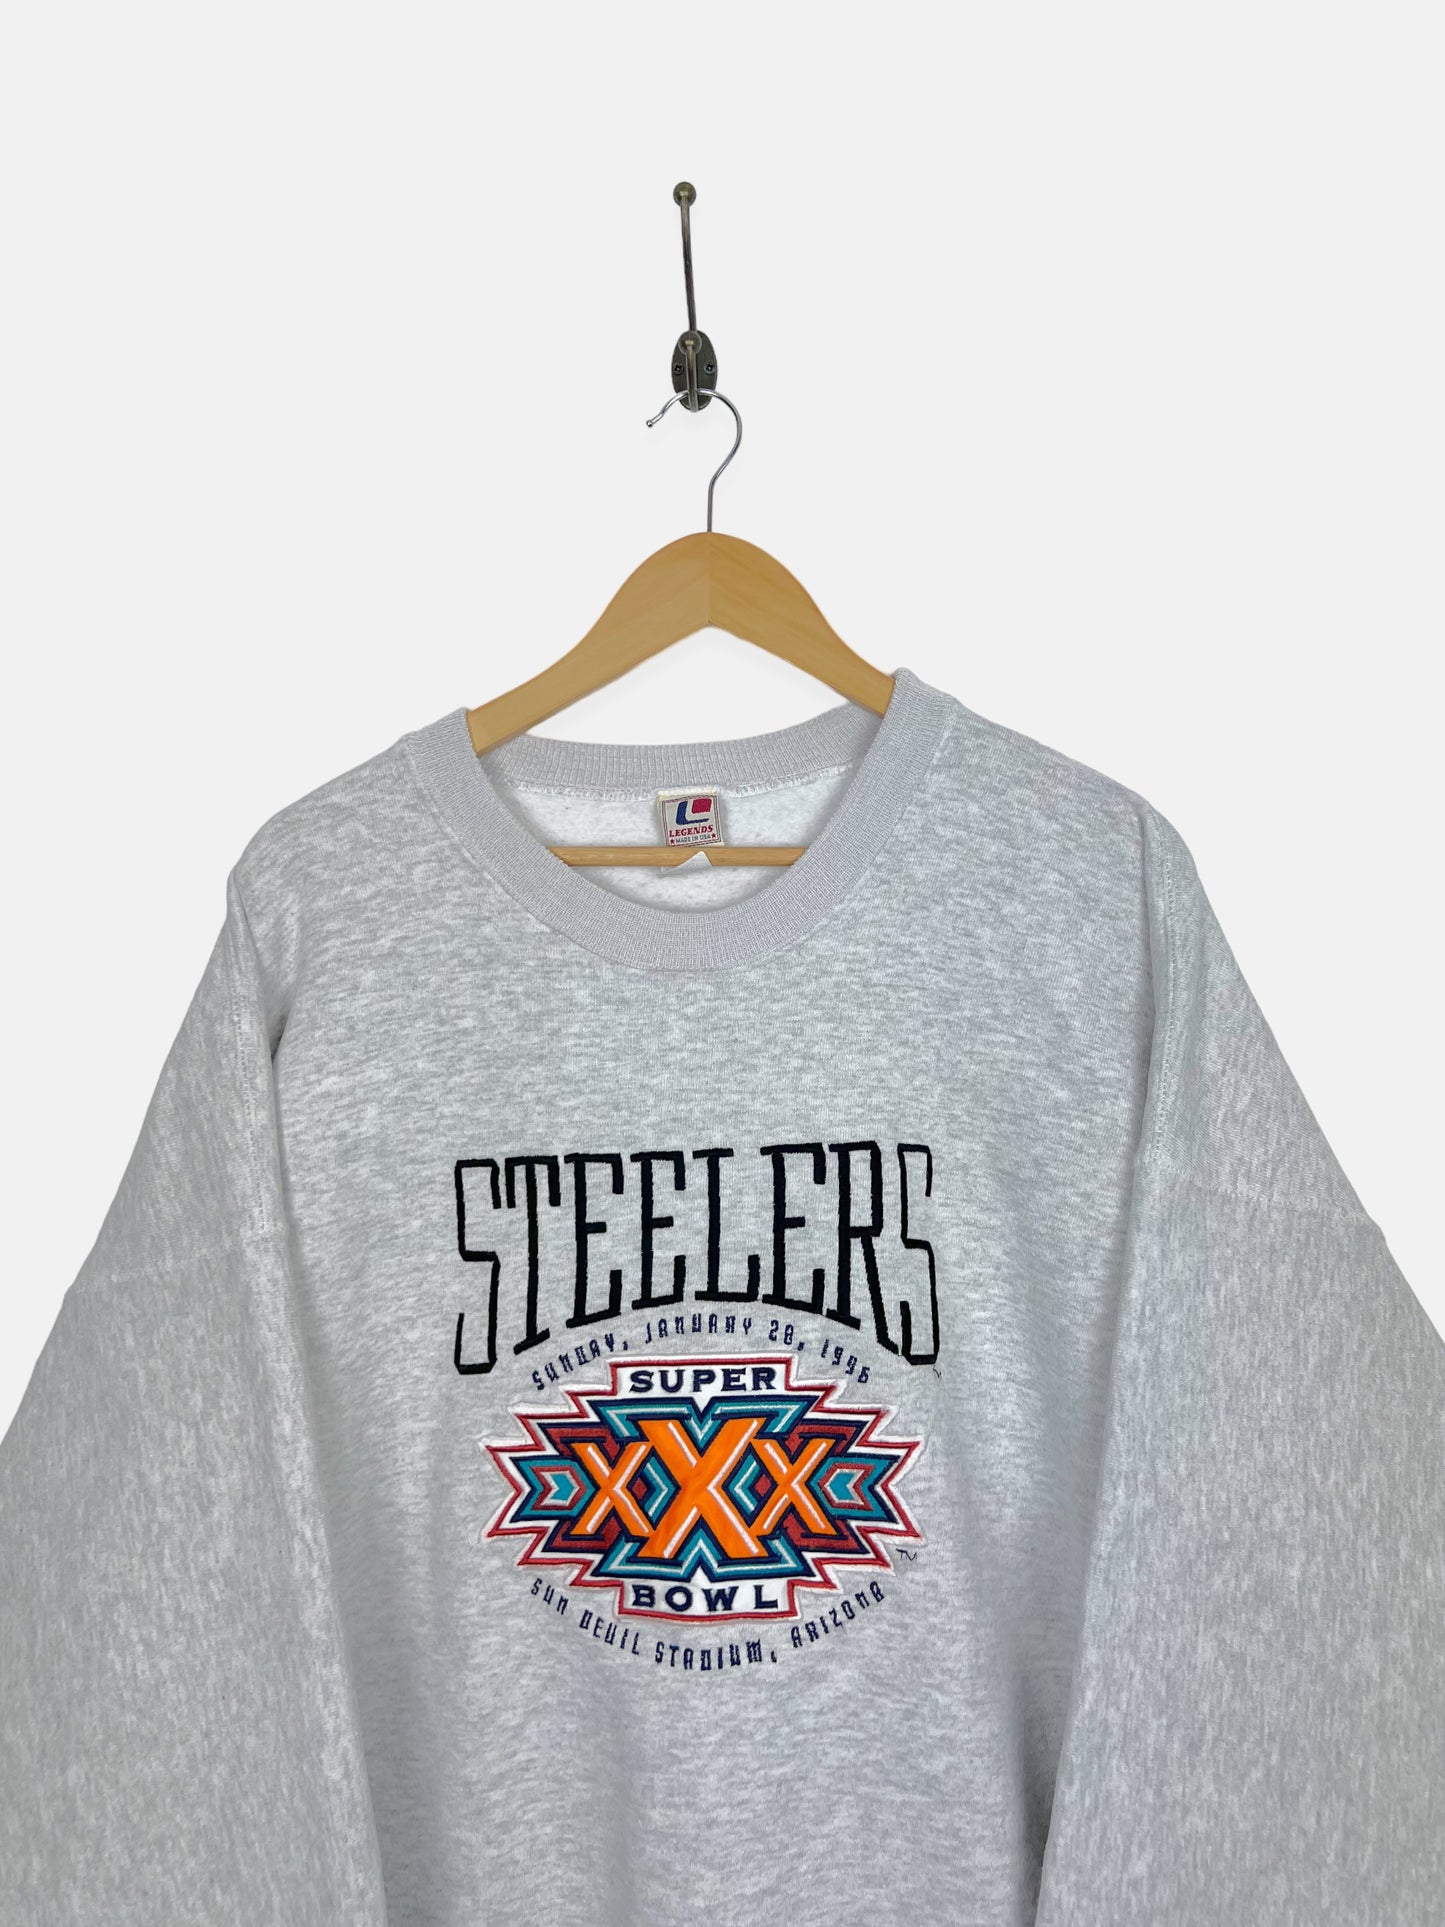 1995 Pittsburgh Steelers NFL USA Made Embroidered Vintage Sweatshirt Size 2-3XL